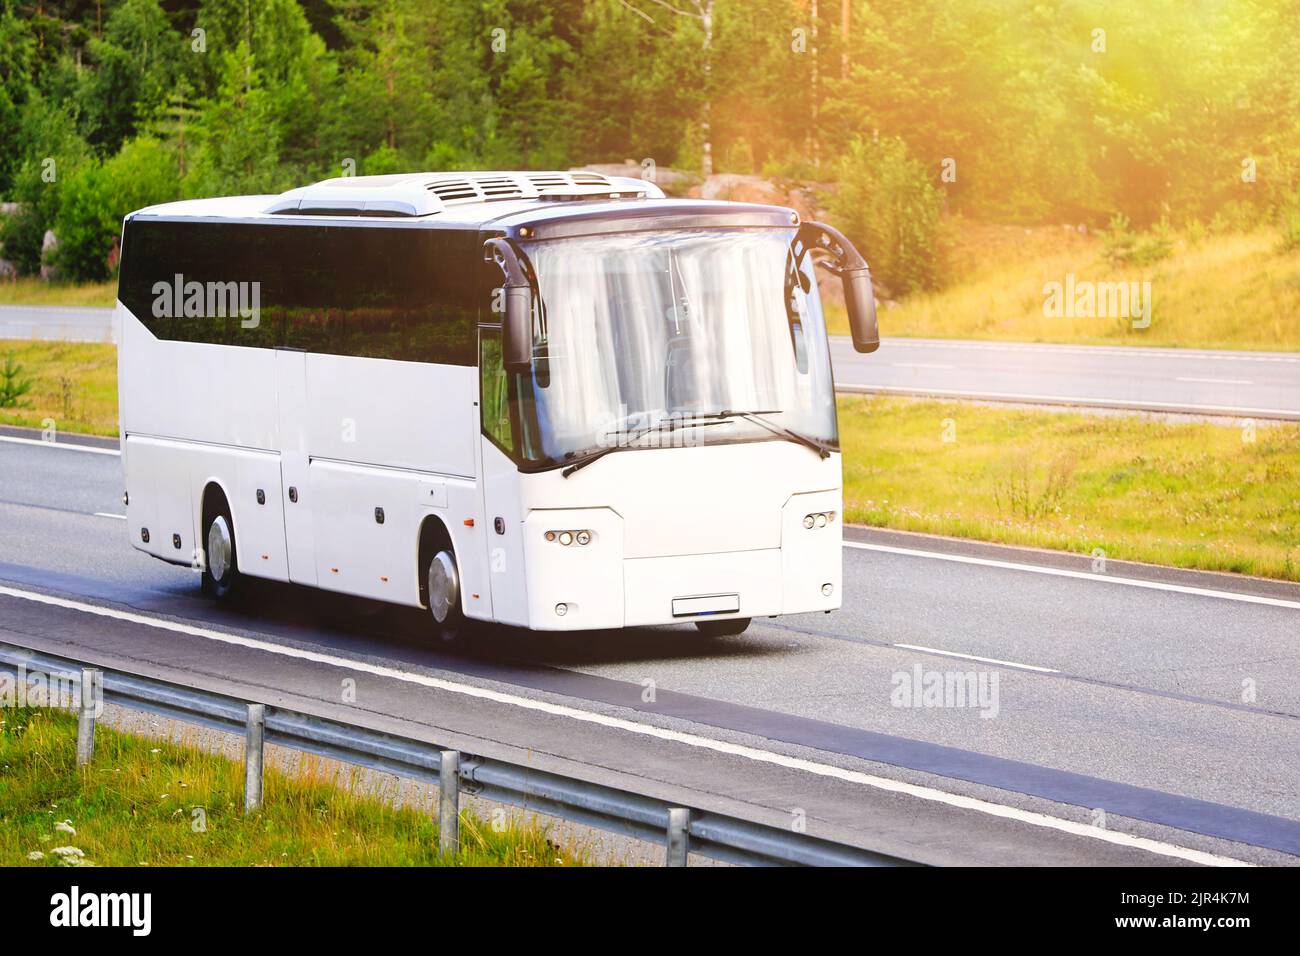 White coach bus traveling at speed on motorway towards golden sunlight in the morning. No people, copy space right of image. Stock Photo